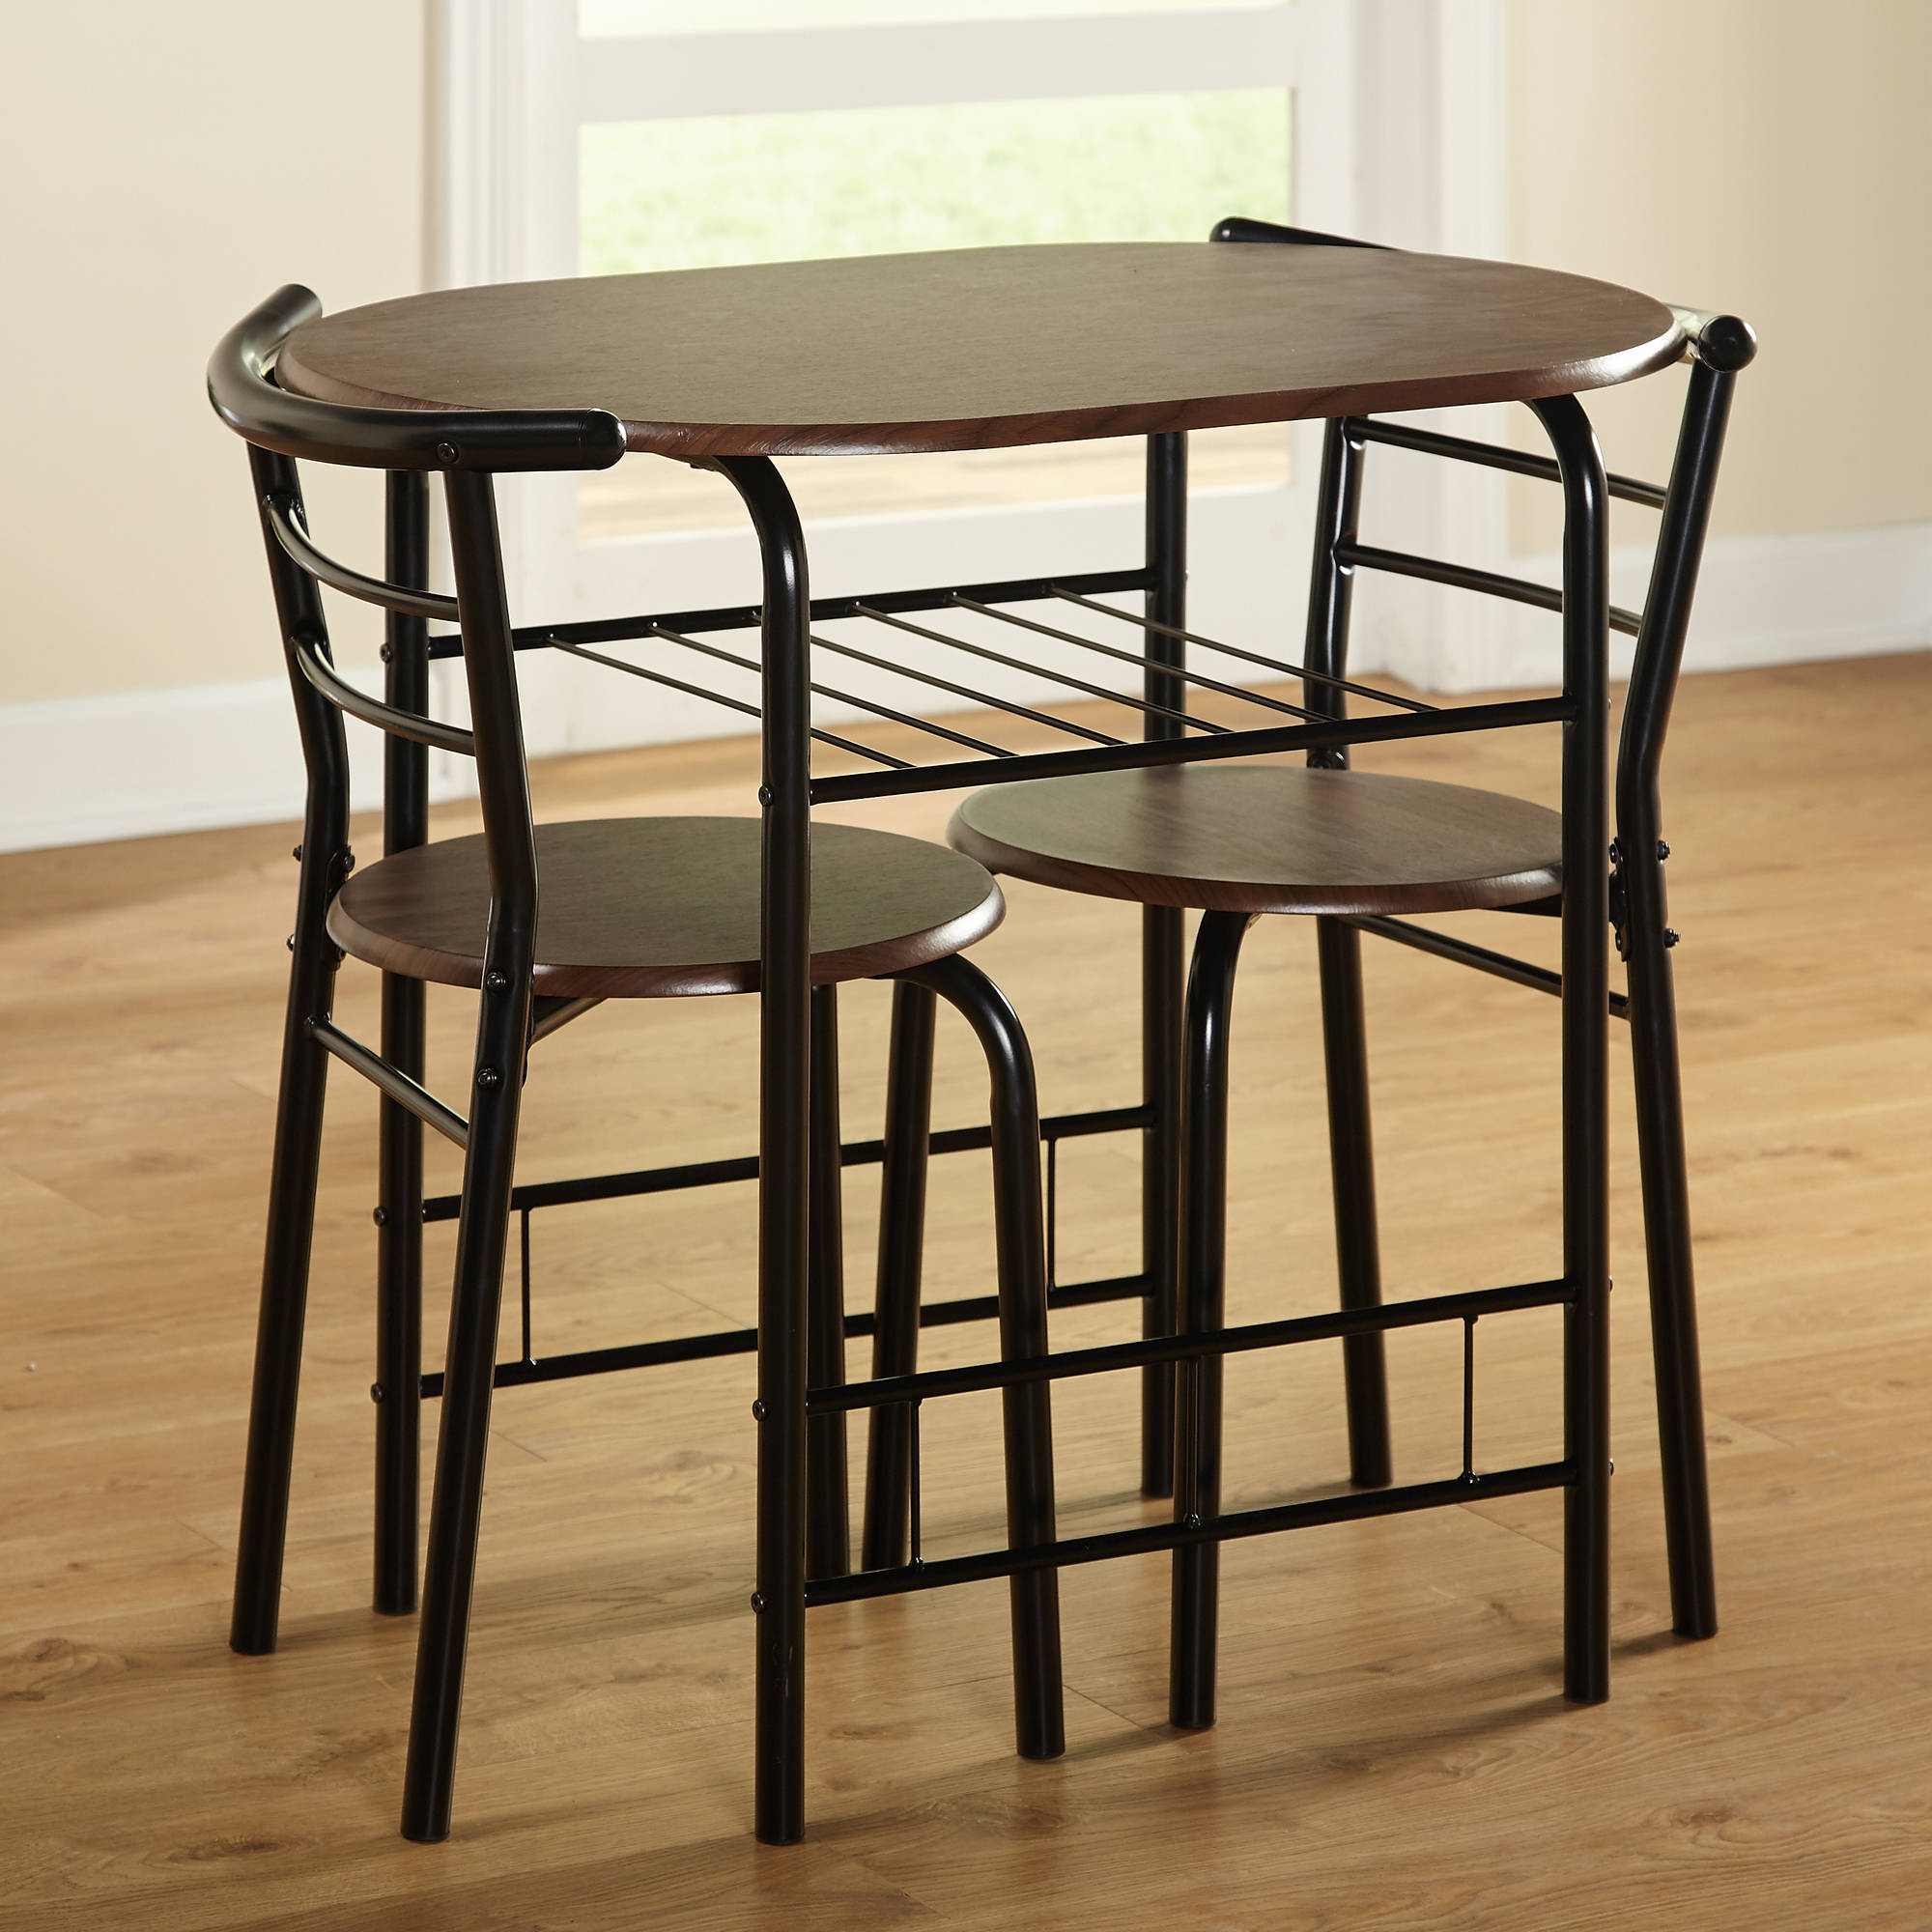 Target Marketing Systems 3 - Piece Bistro Dining Set - image 3 of 5